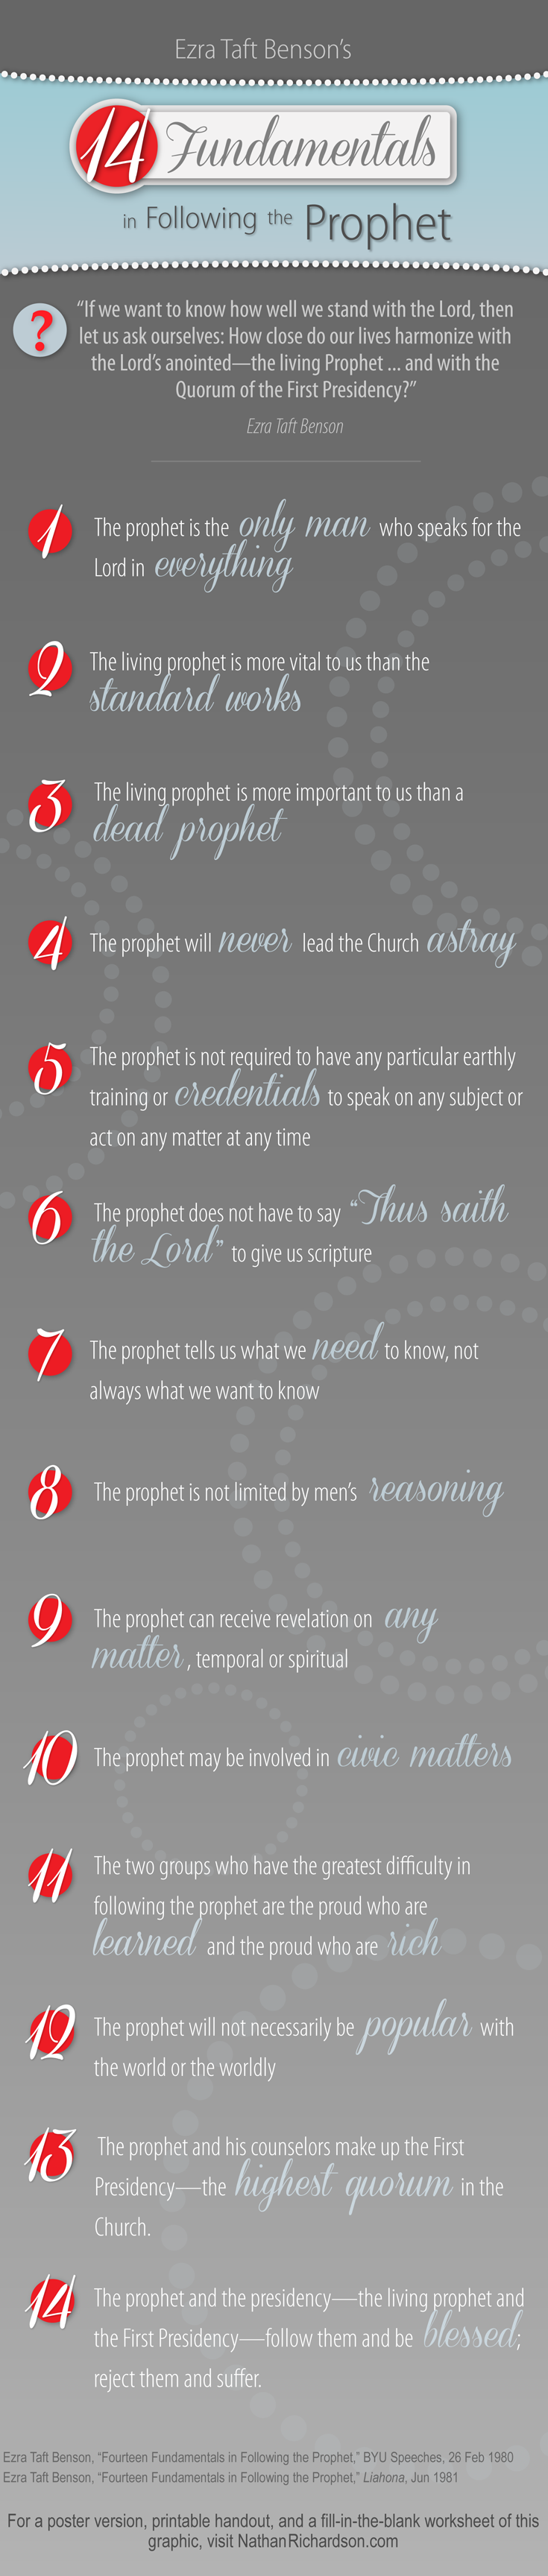 fourteen fundamentals in following the prophet infographic, Jelaire Richardson